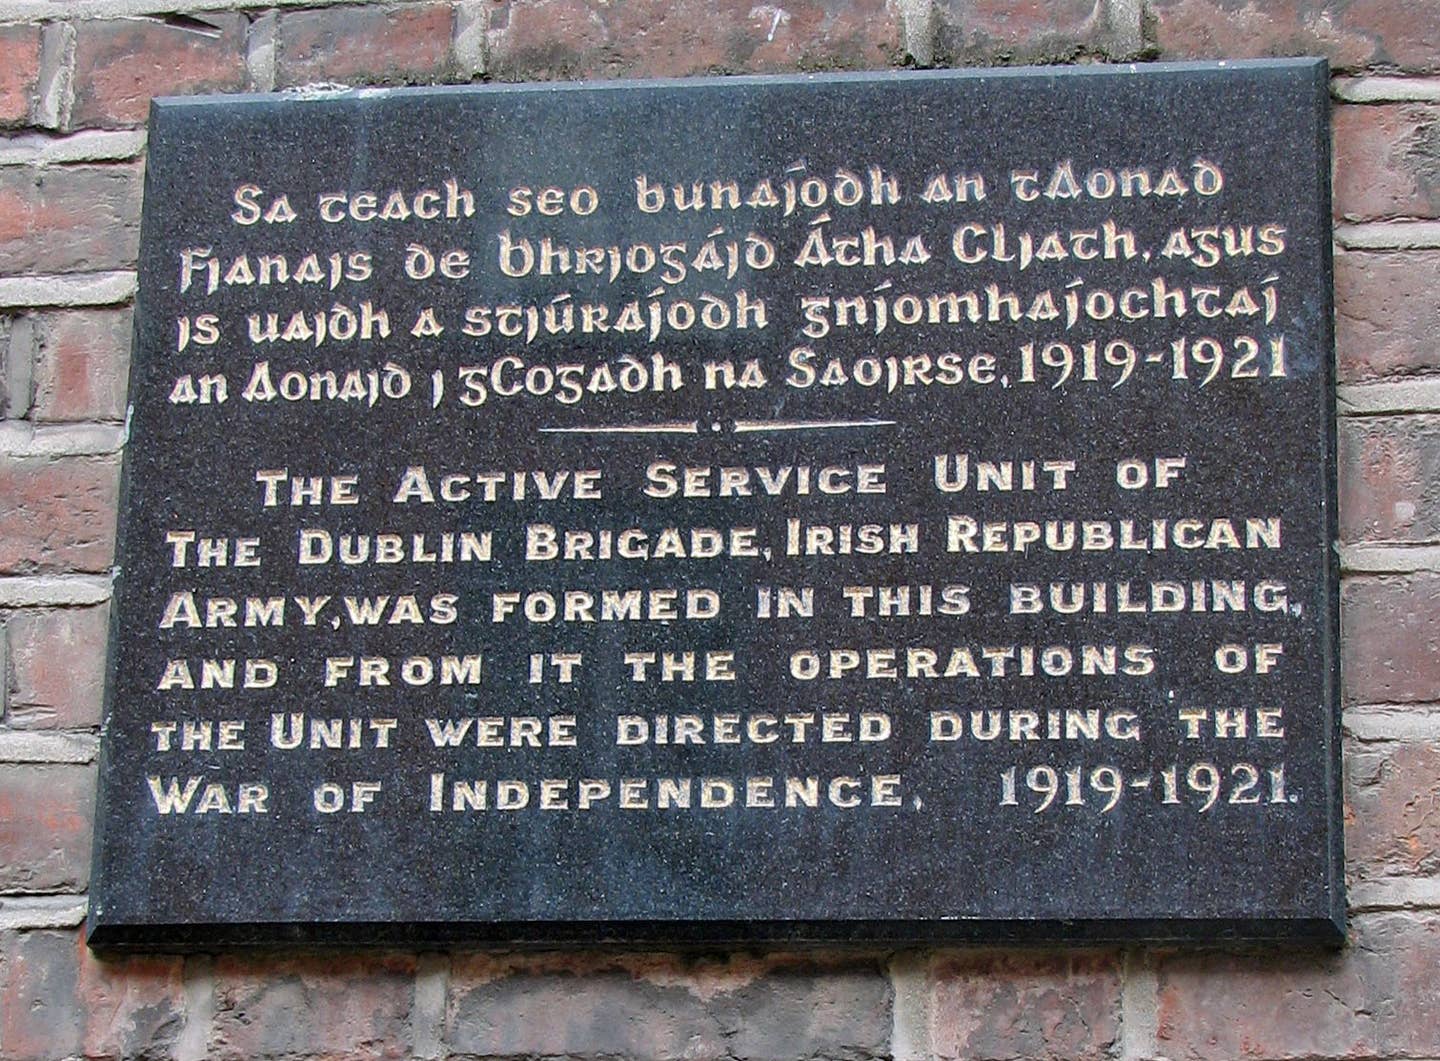 A plaque commemorating the Irish War during with a British General was held captive